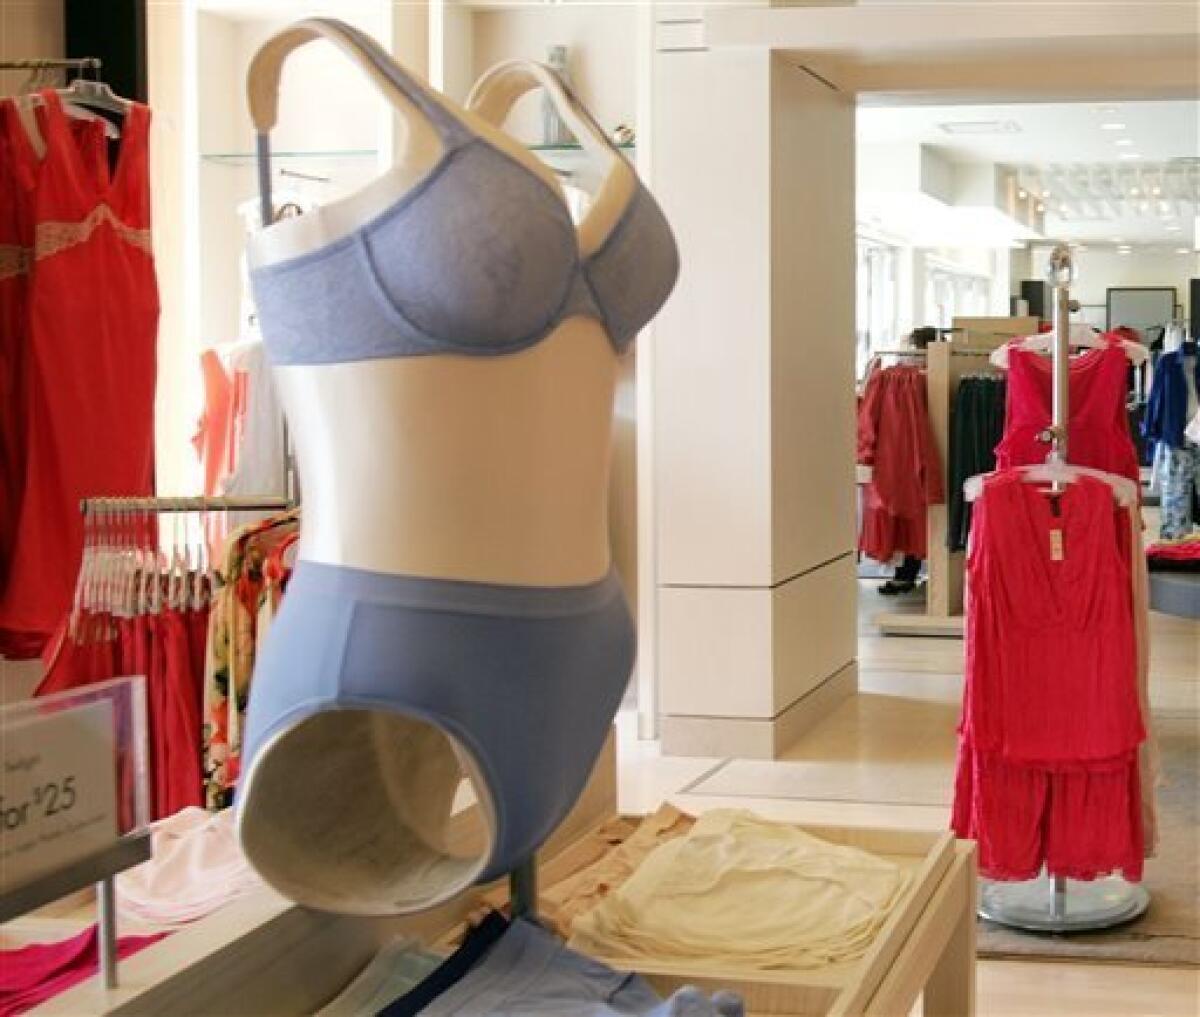 The perfect fit: Wonderbra maker buys Maidenform - The San Diego